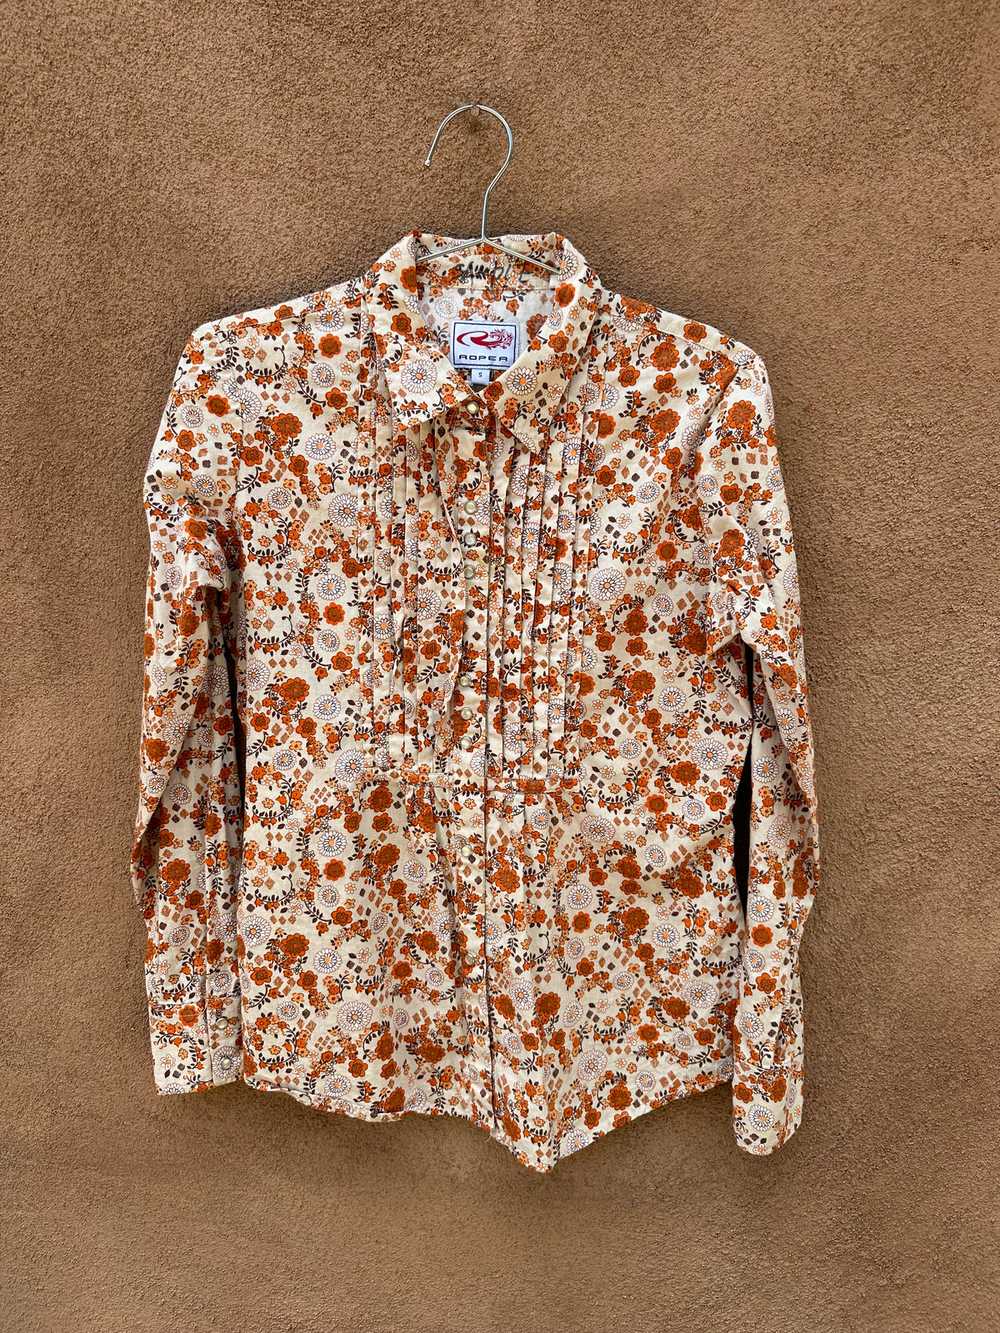 Floral Roper Western Blouse - Small - image 1